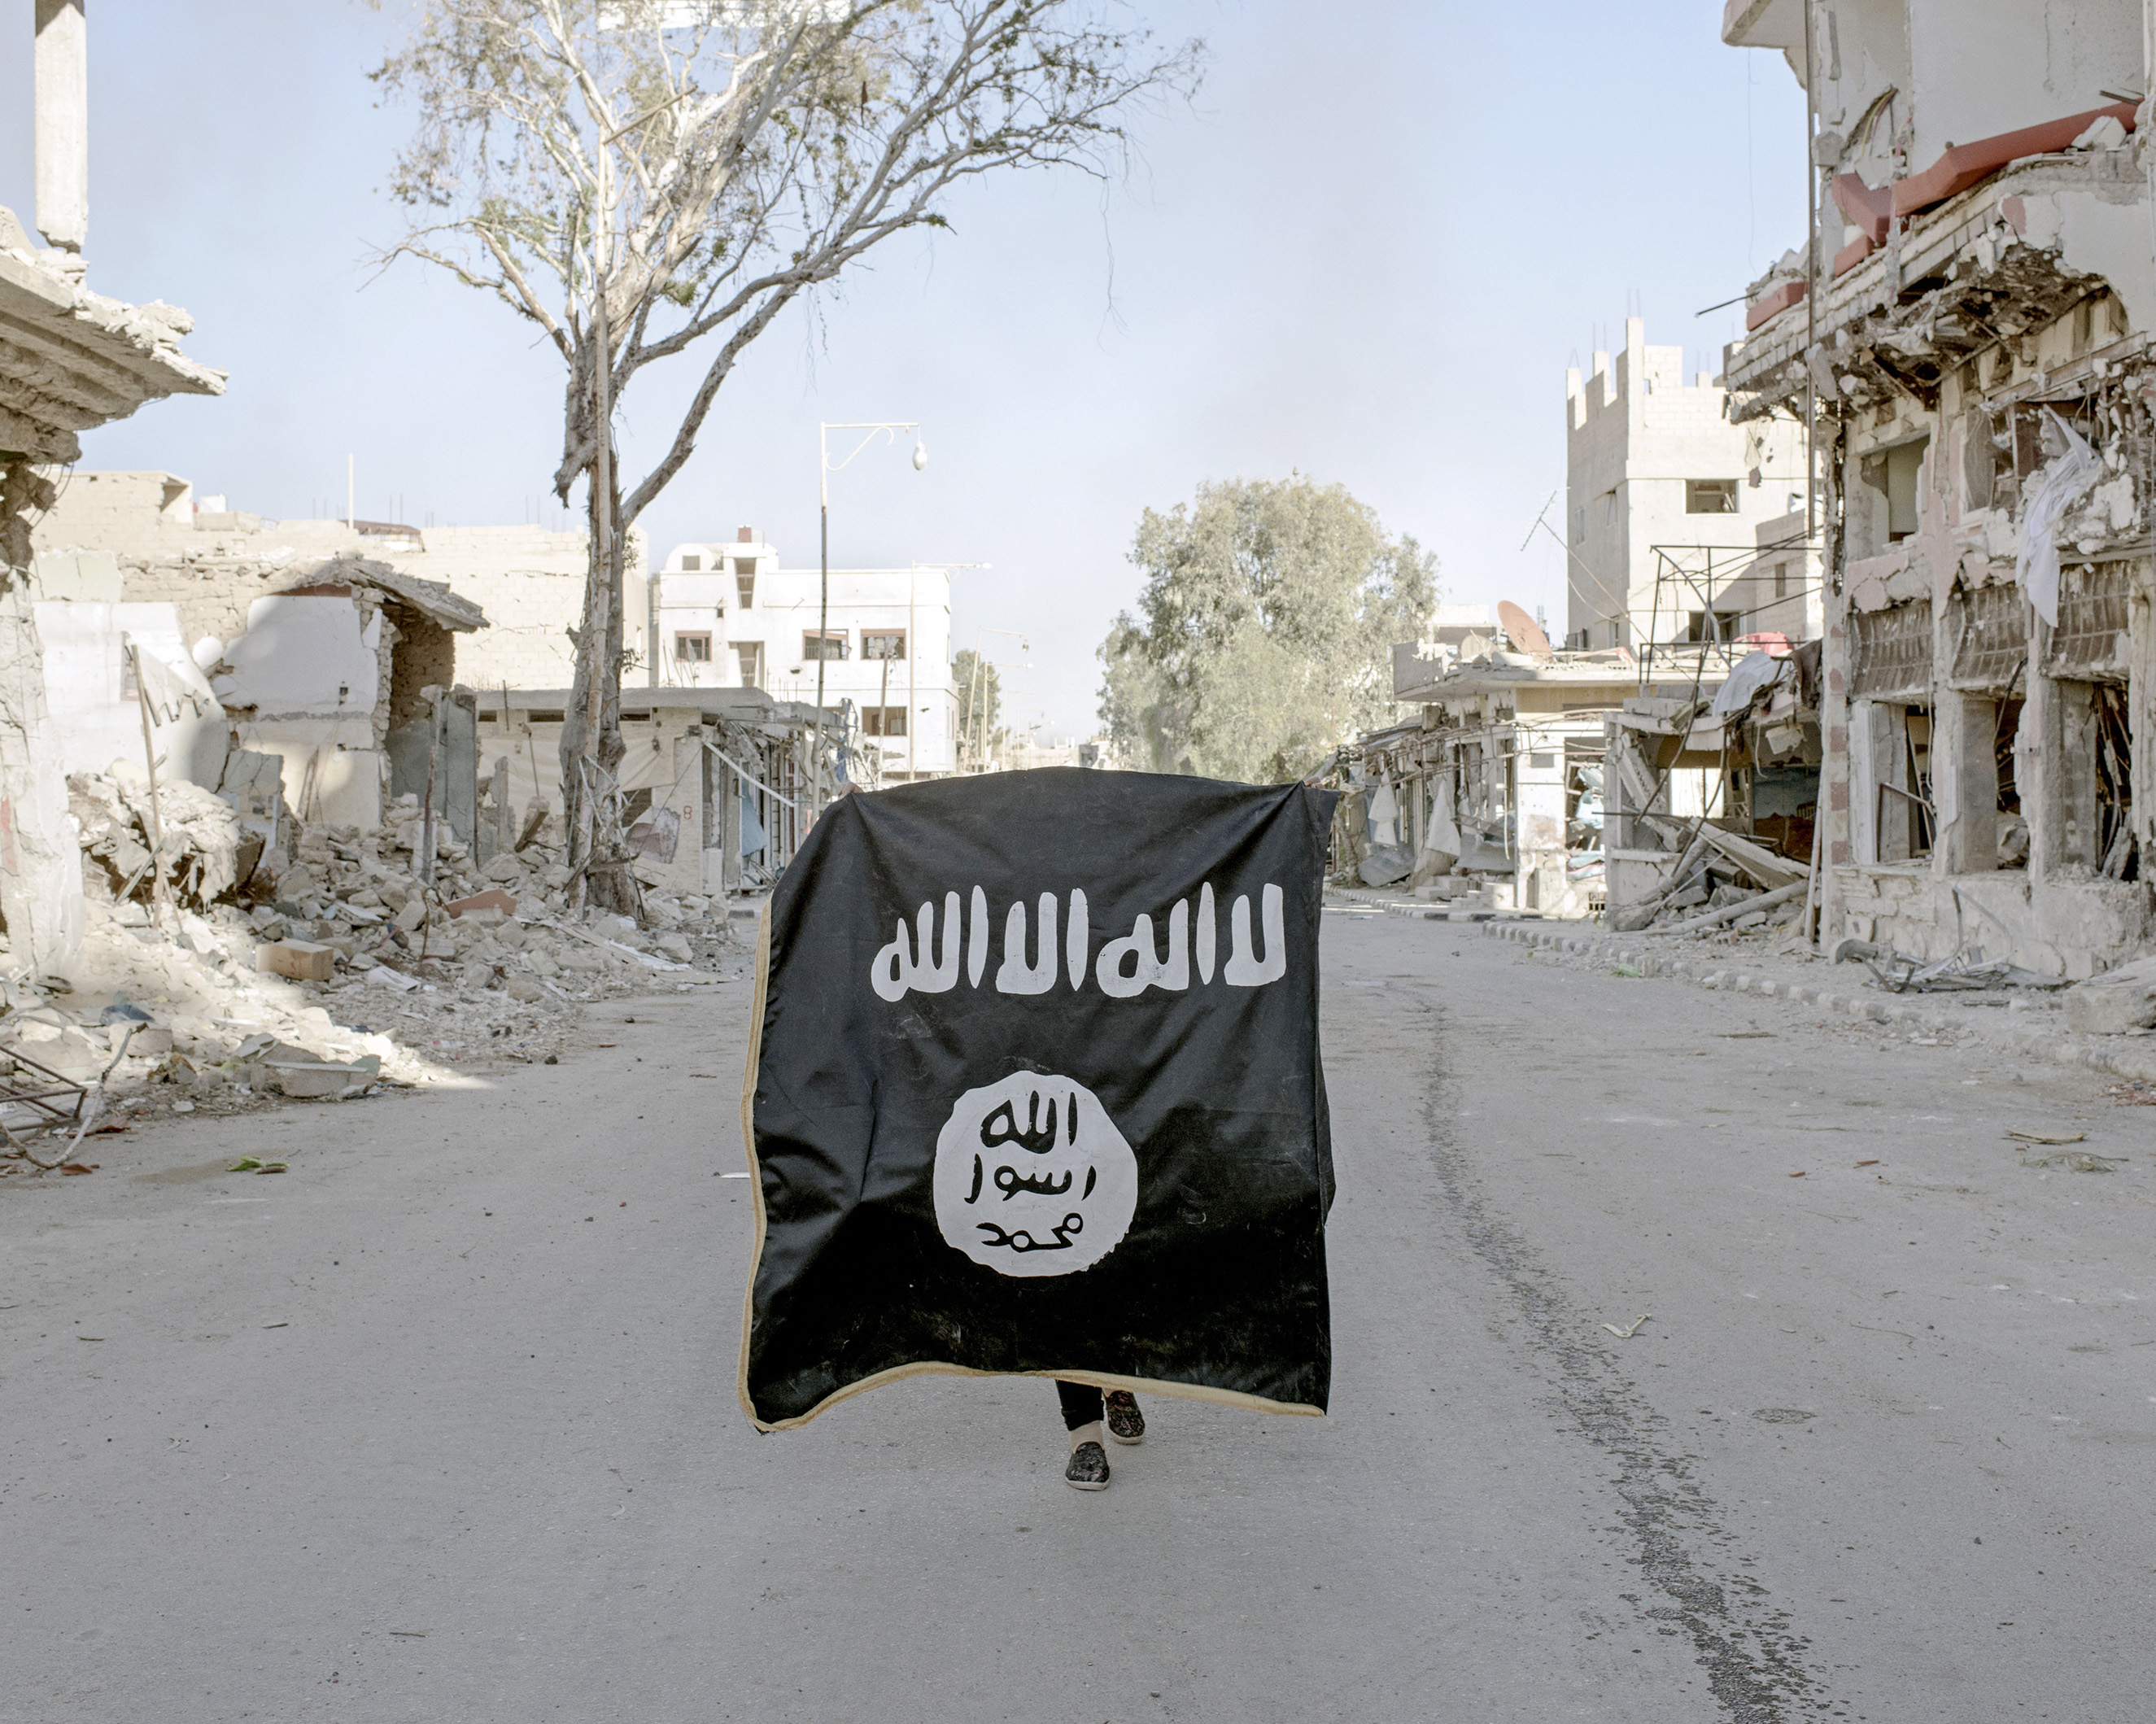 A volunteer soldier from the Syrian National Defense Forces holds up an ISIS flag, discovered in a street of downtown Palmyra, Syria, April 1, 2016.From  Inside War Ravaged Syria